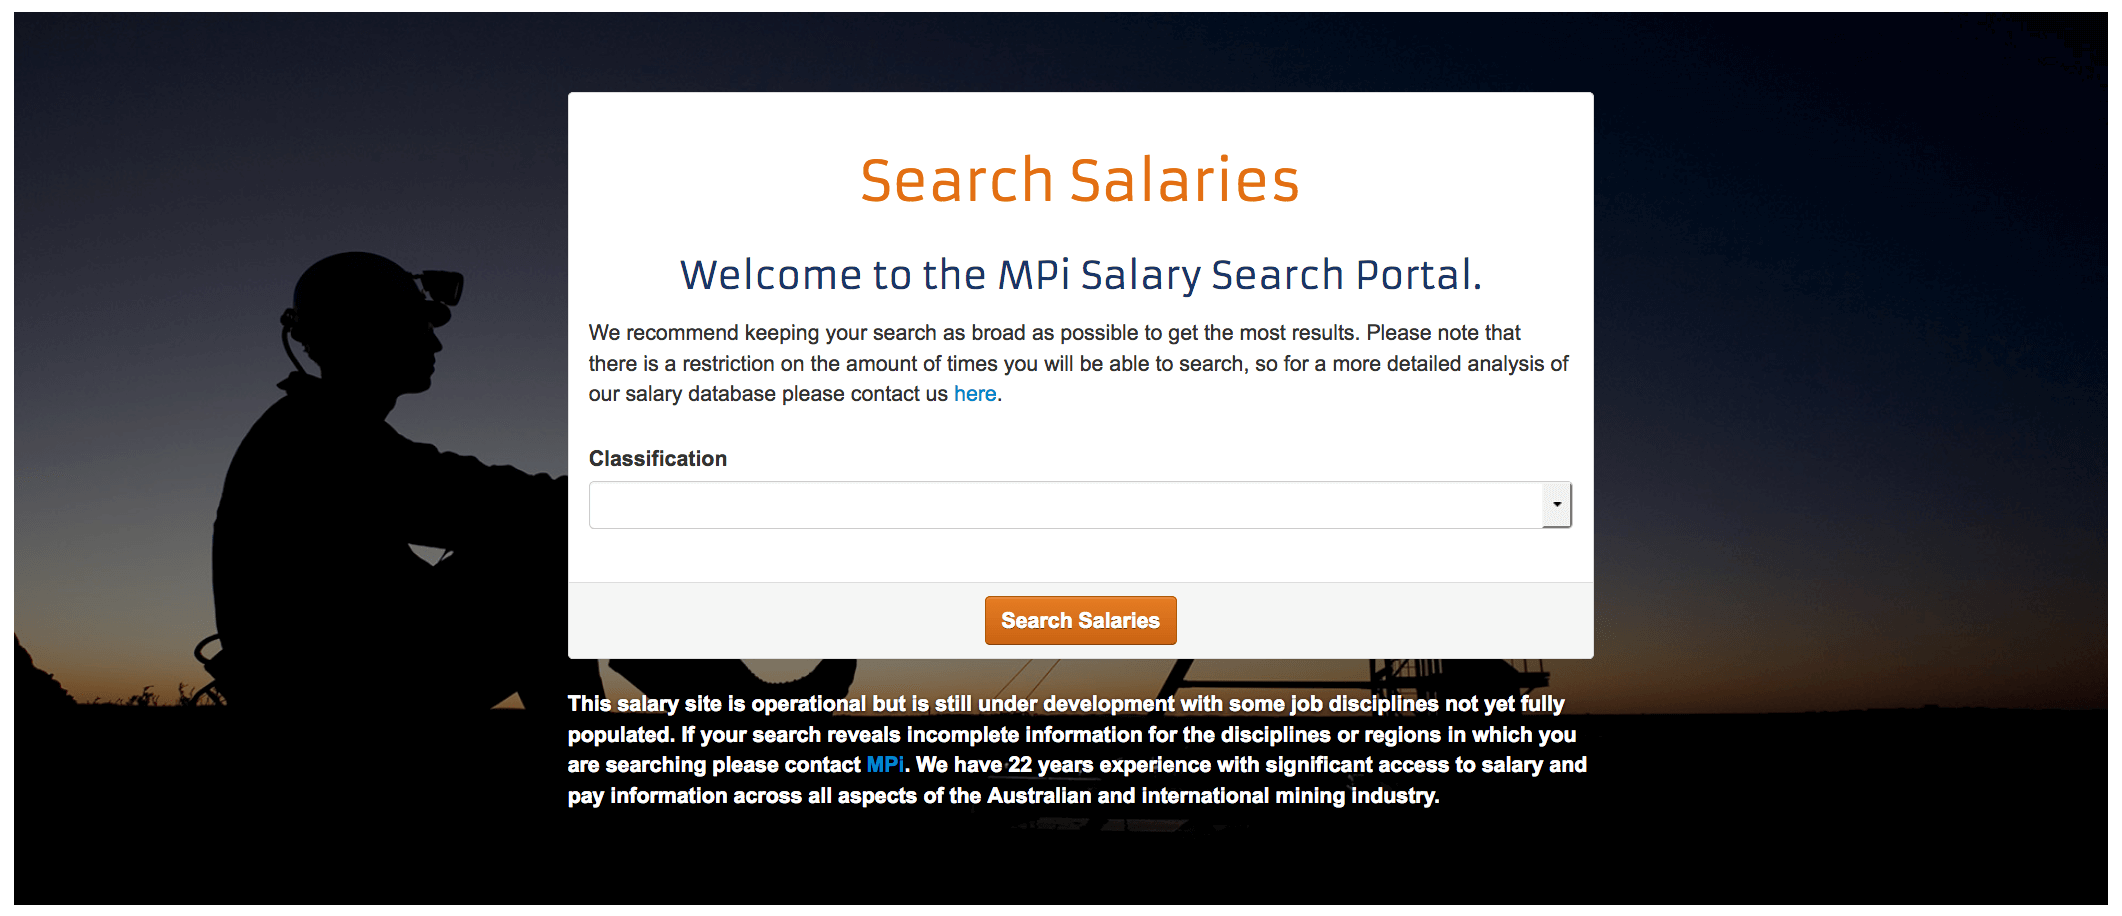 Mining People’s Salary Search portal is free to use and has the most up-to-date data about mining salaries.